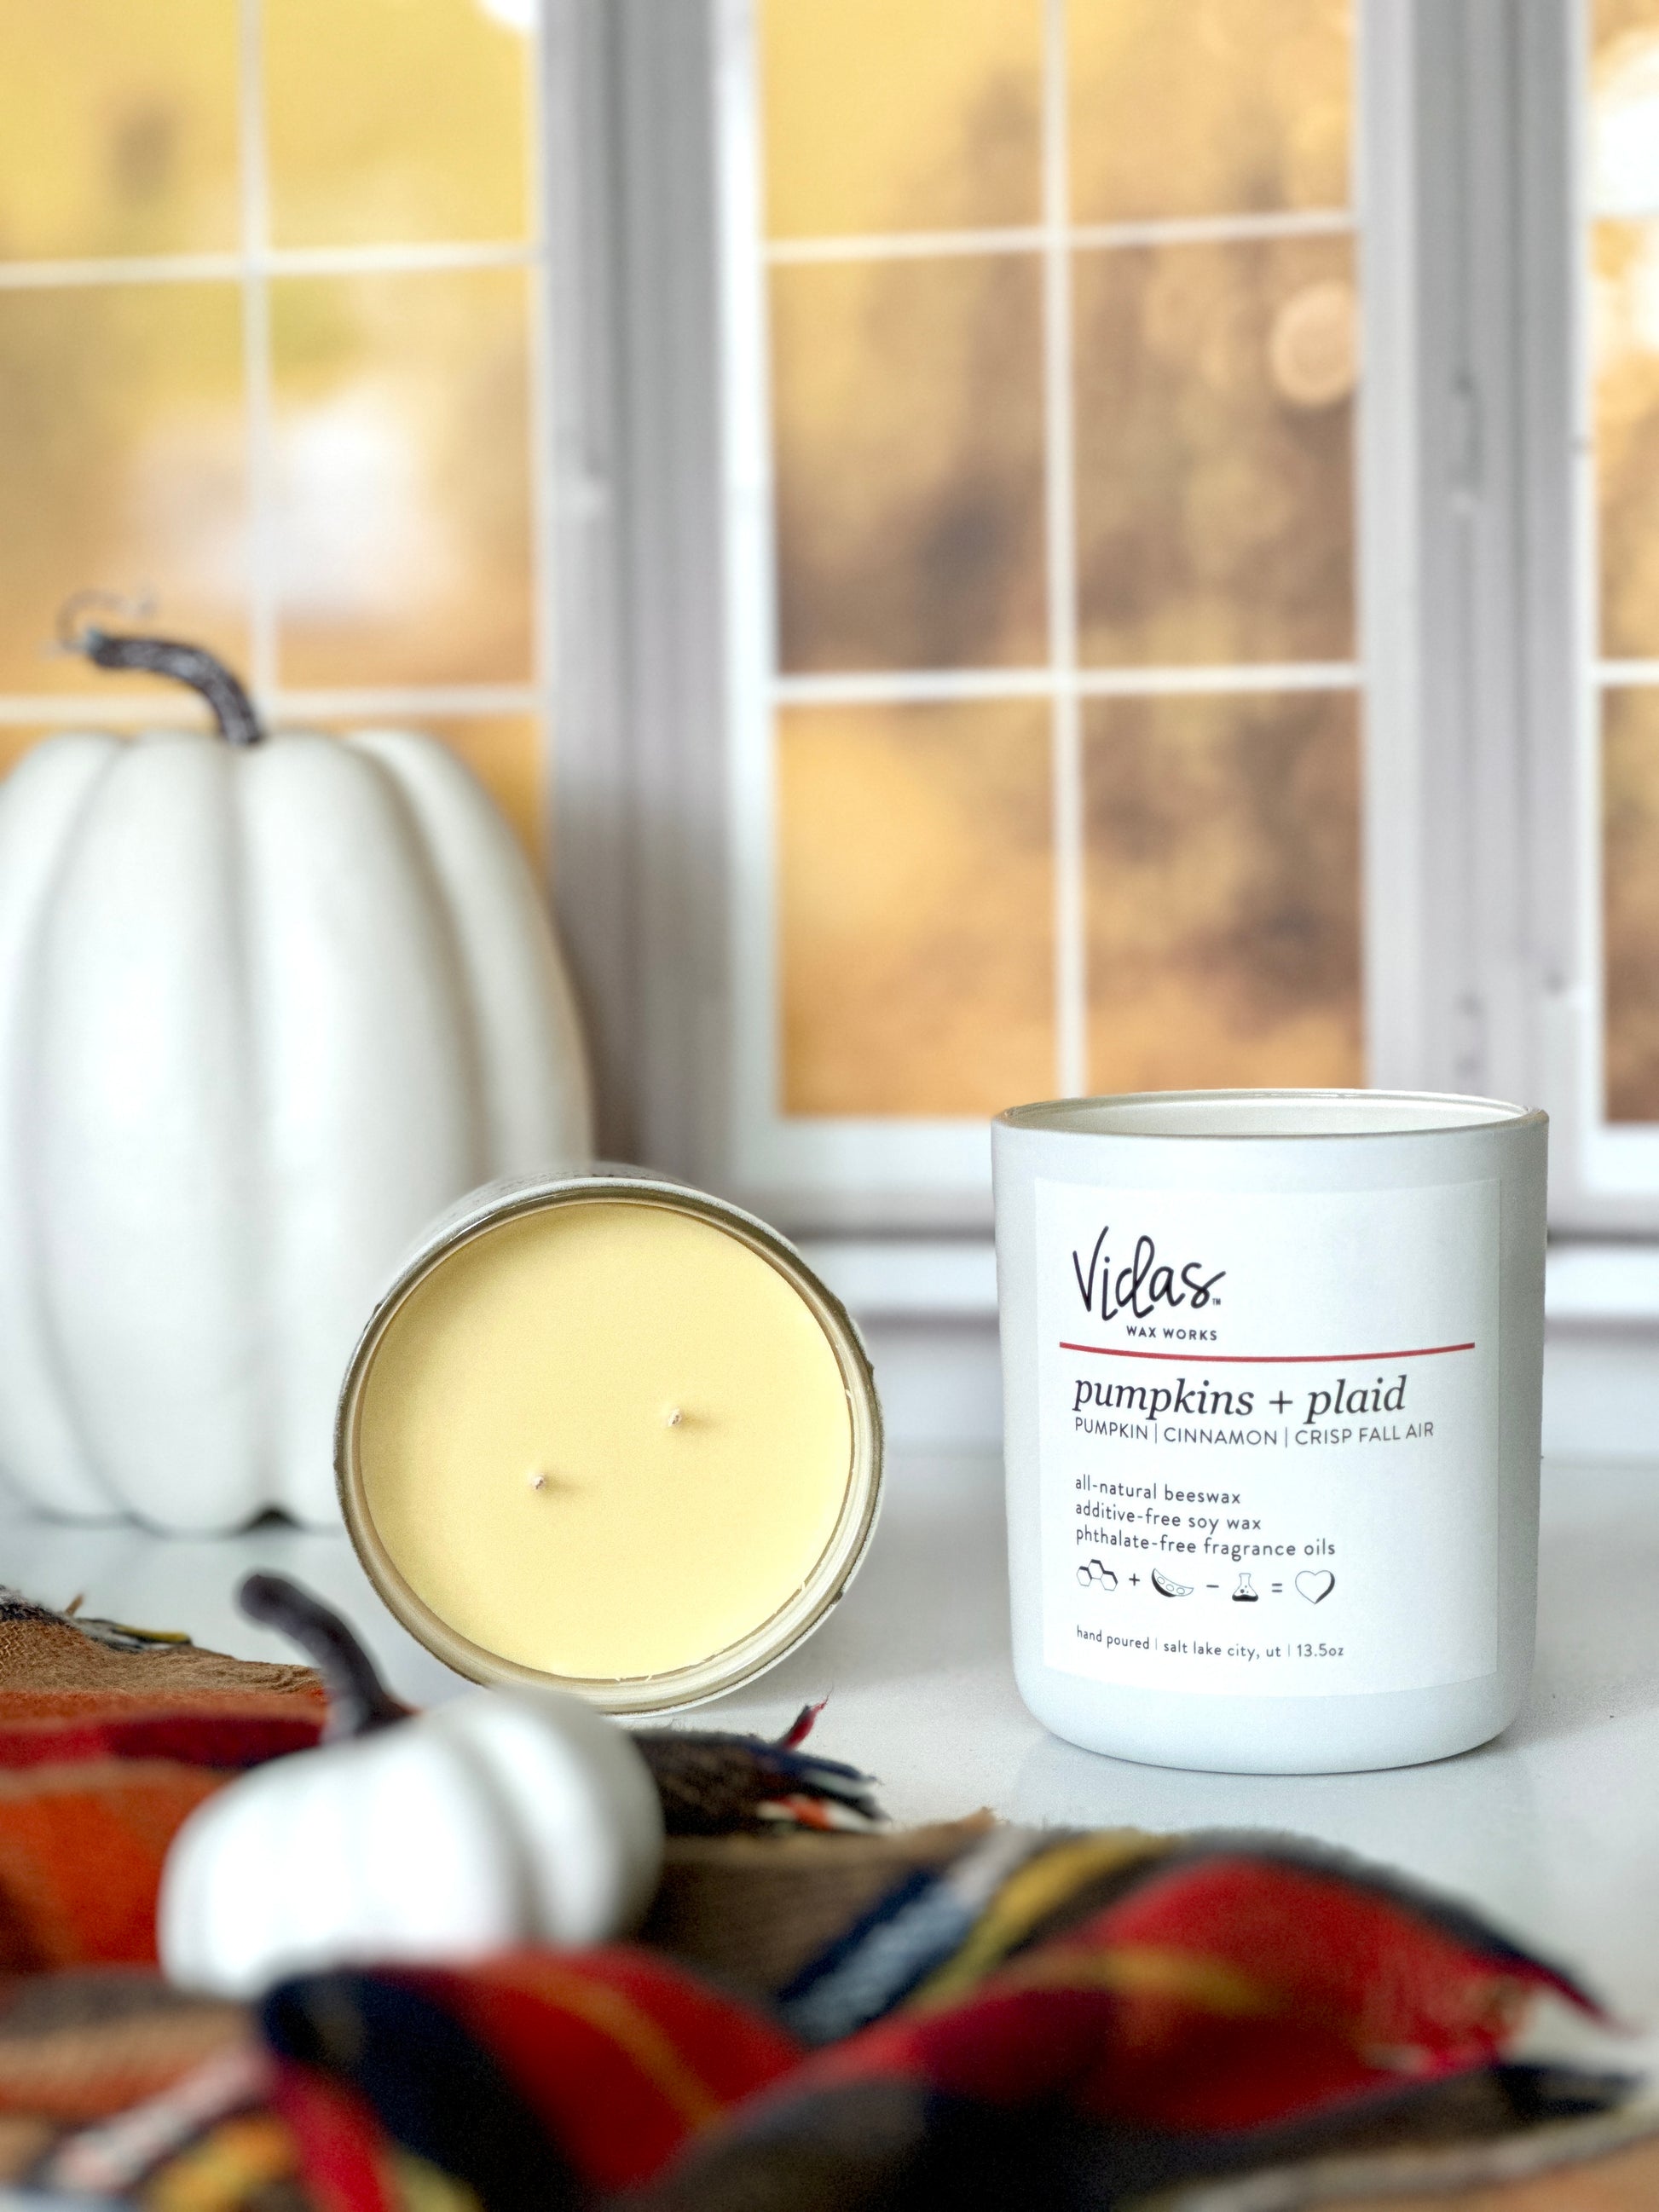 Capturing fall's allure: Pumpkins, cinnamon, and crisp fall air scent. A 13.5oz candle lays open showcasing its yellow tinted all-natural beeswax soy wax blend color next to another candle. A plaid scarf adorned with a small white pumpkin graces the foreground, while a taller white pumpkin rests against the backdrop of blurred yellow fall leaves outside a window, echoing the season's charm.